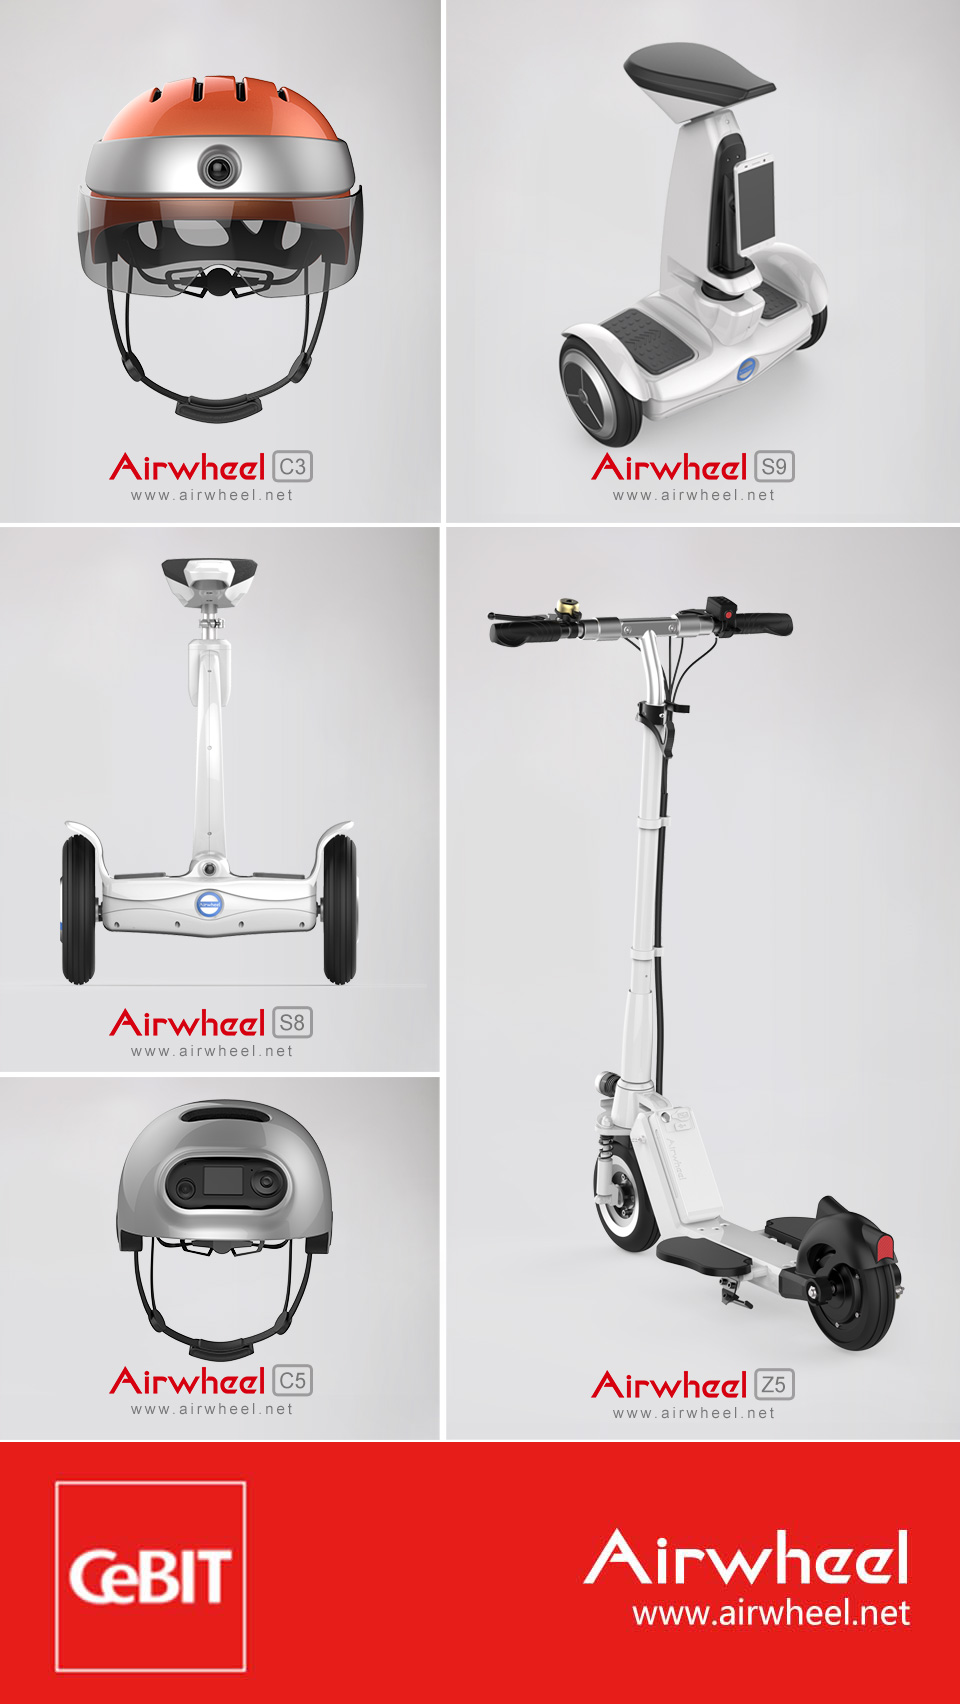 airwheel new products